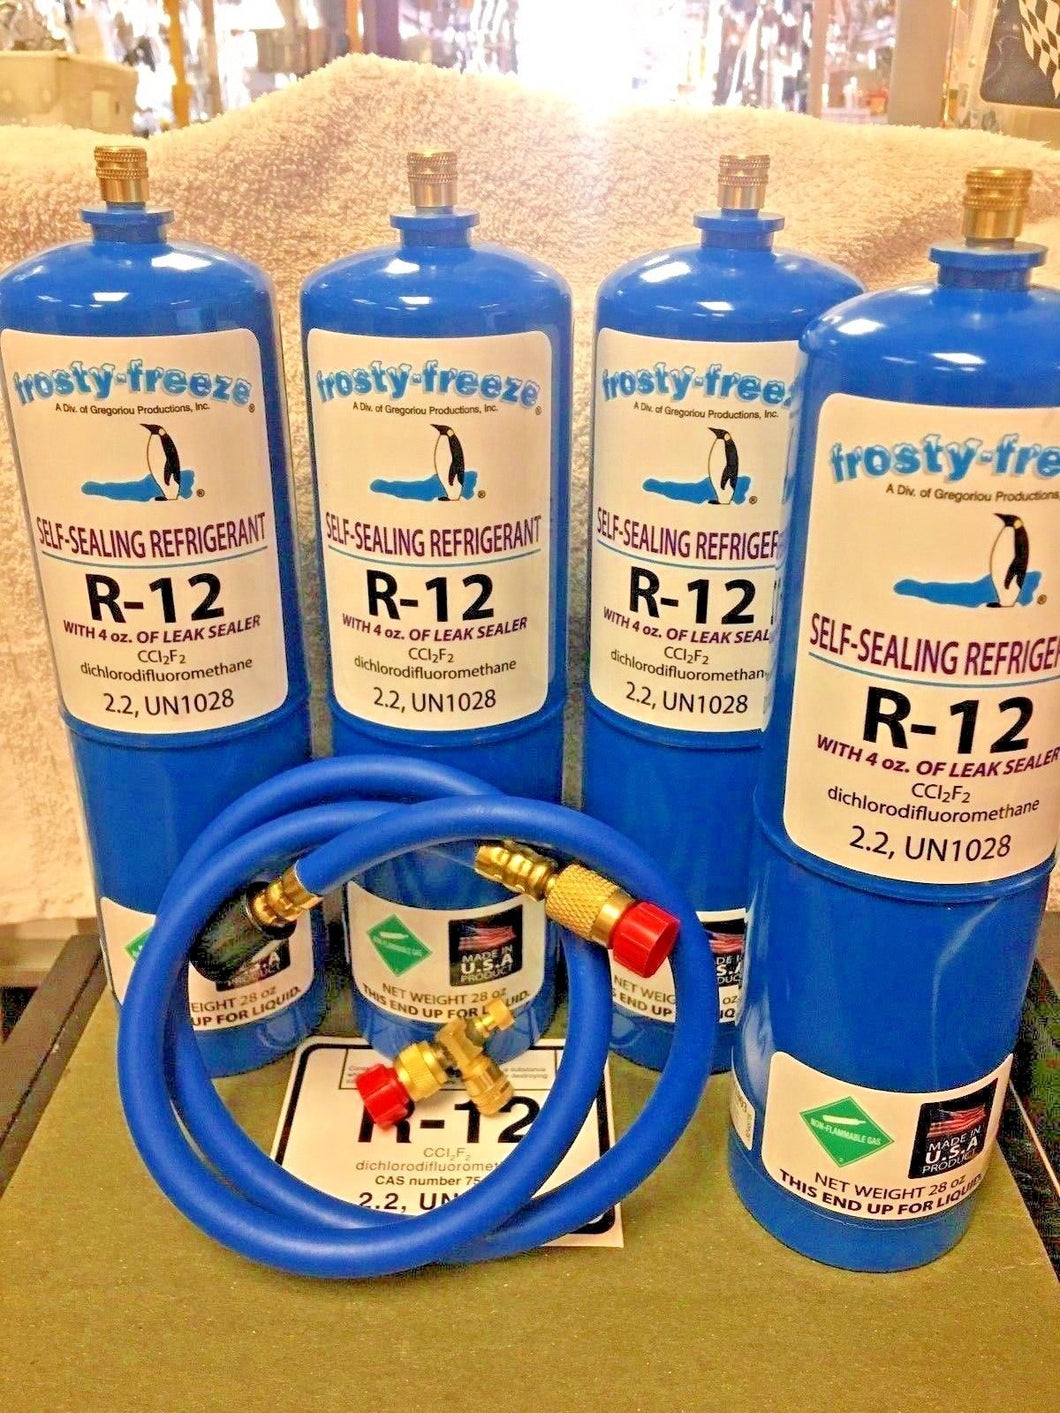 R12 Refrigerant R-12, (4) 28 oz. Cans, With LEAK STOP, ProSeal XL4, 1 to 5 HP